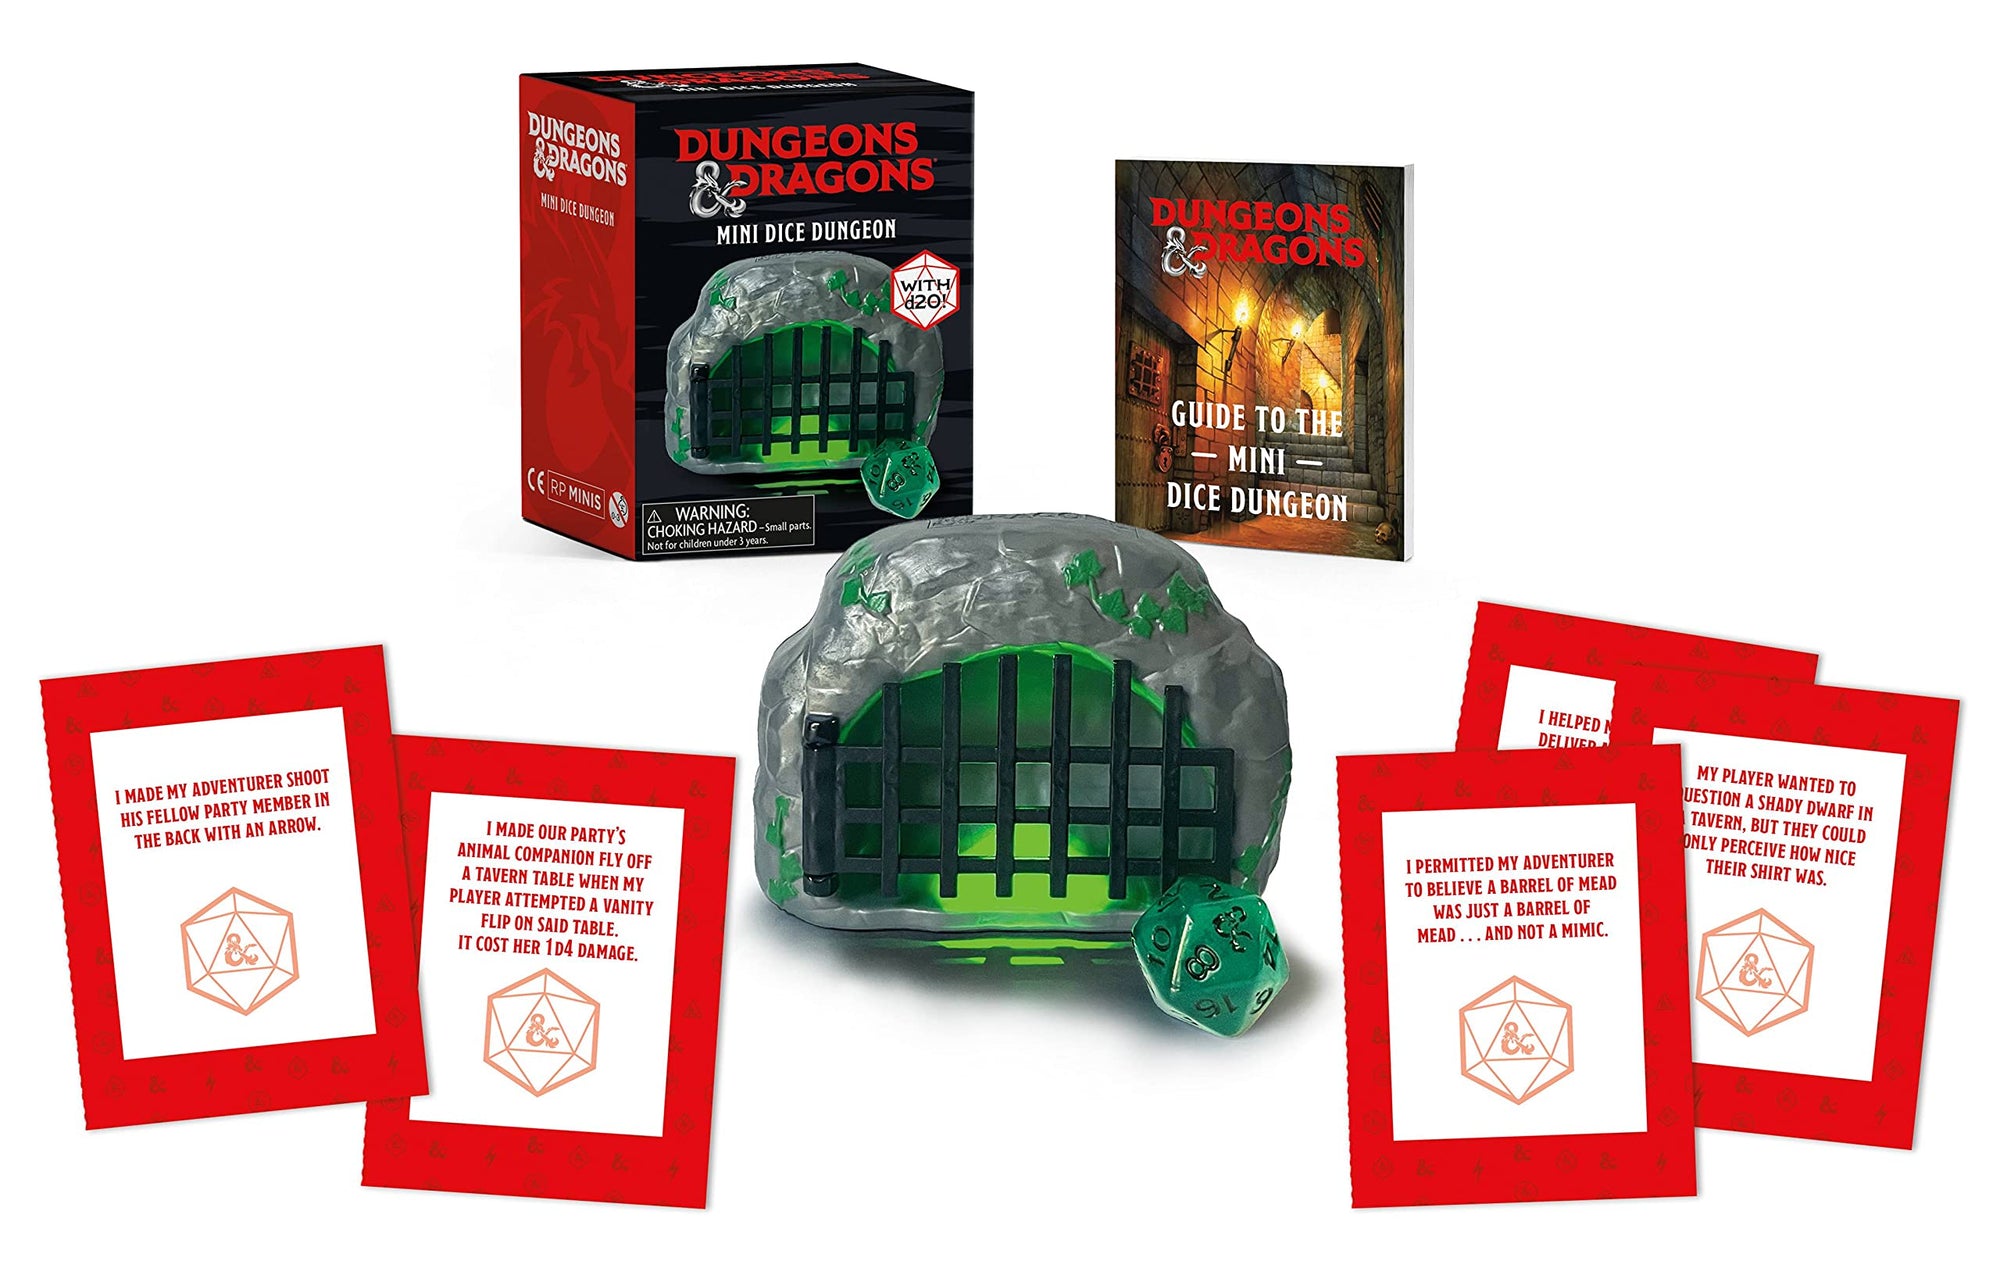 An image of the inside contents of a mini dice dungeon for playing the game Dungeons & Dragons. It includes a glowing cave with a barred gate over it, a D20 dice, some cards and a guide.